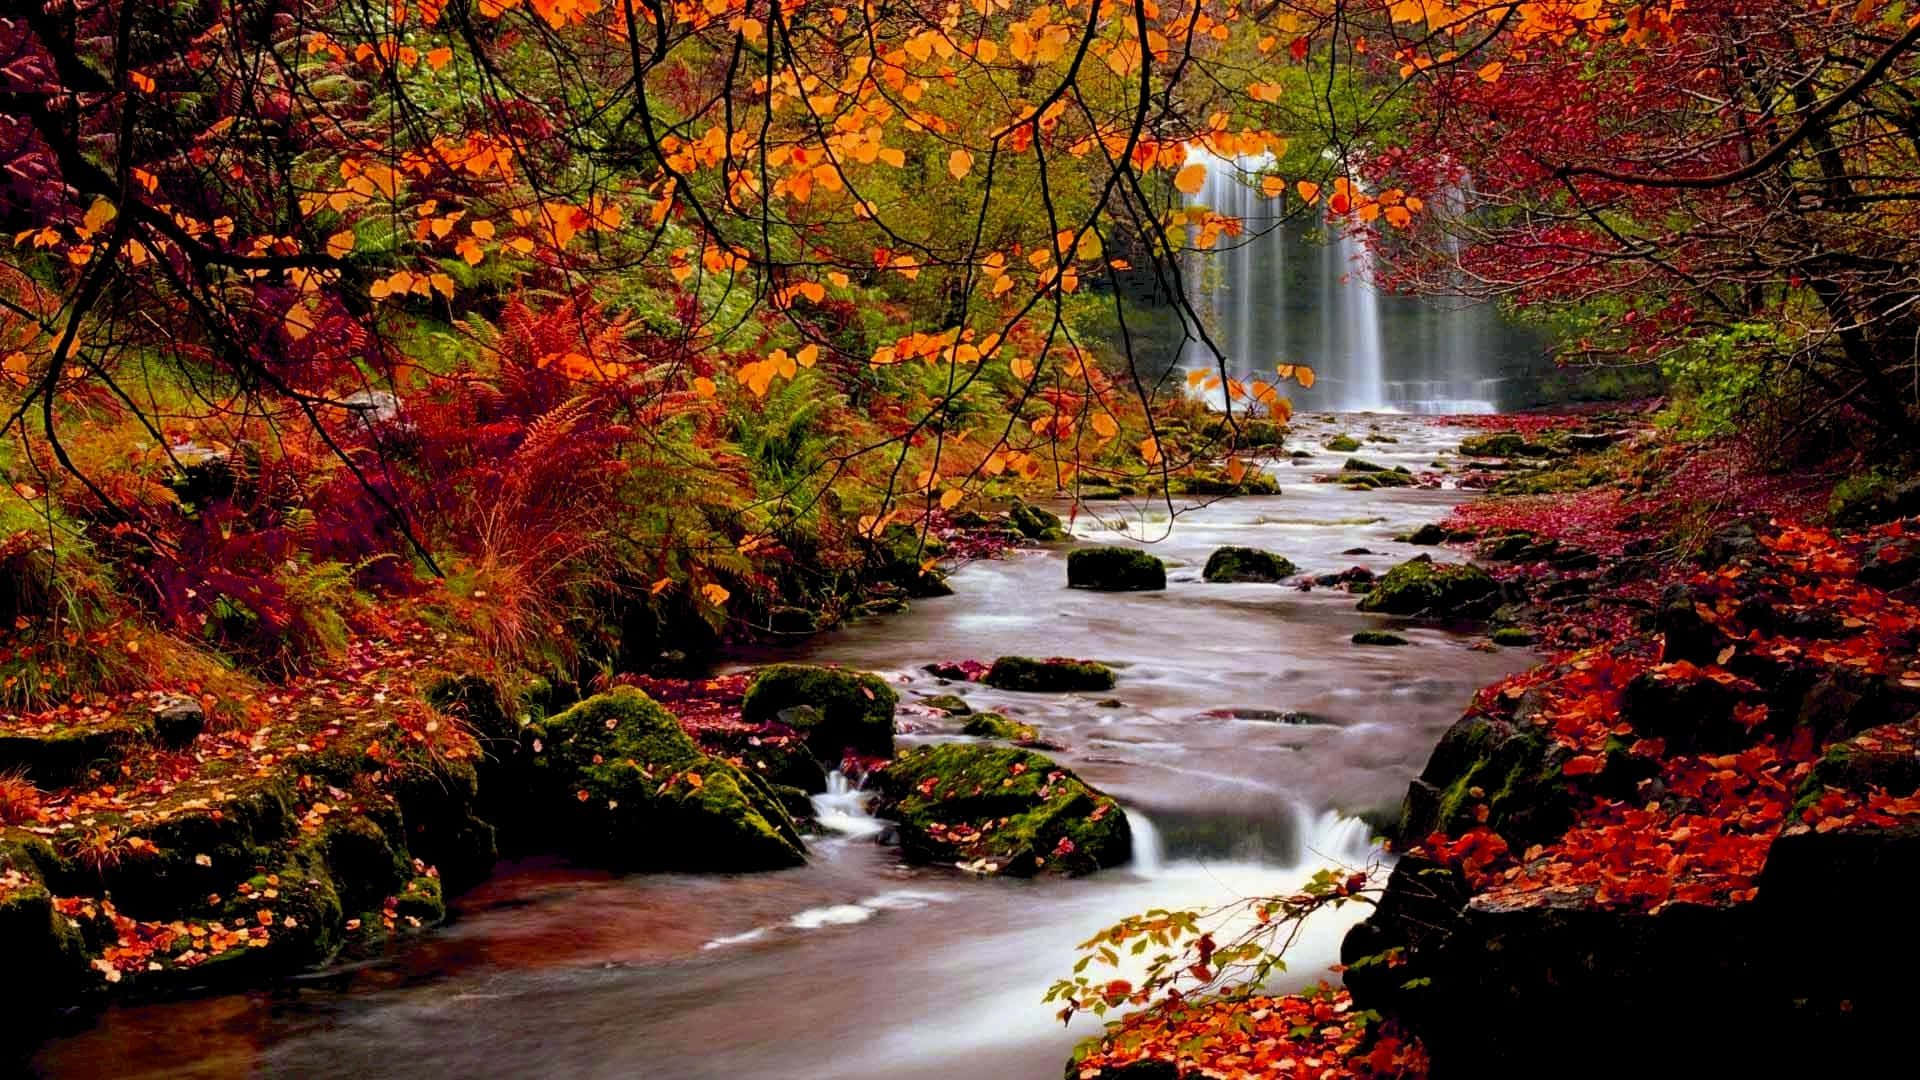 A breathtaking view of Nature in the Fall season Wallpaper